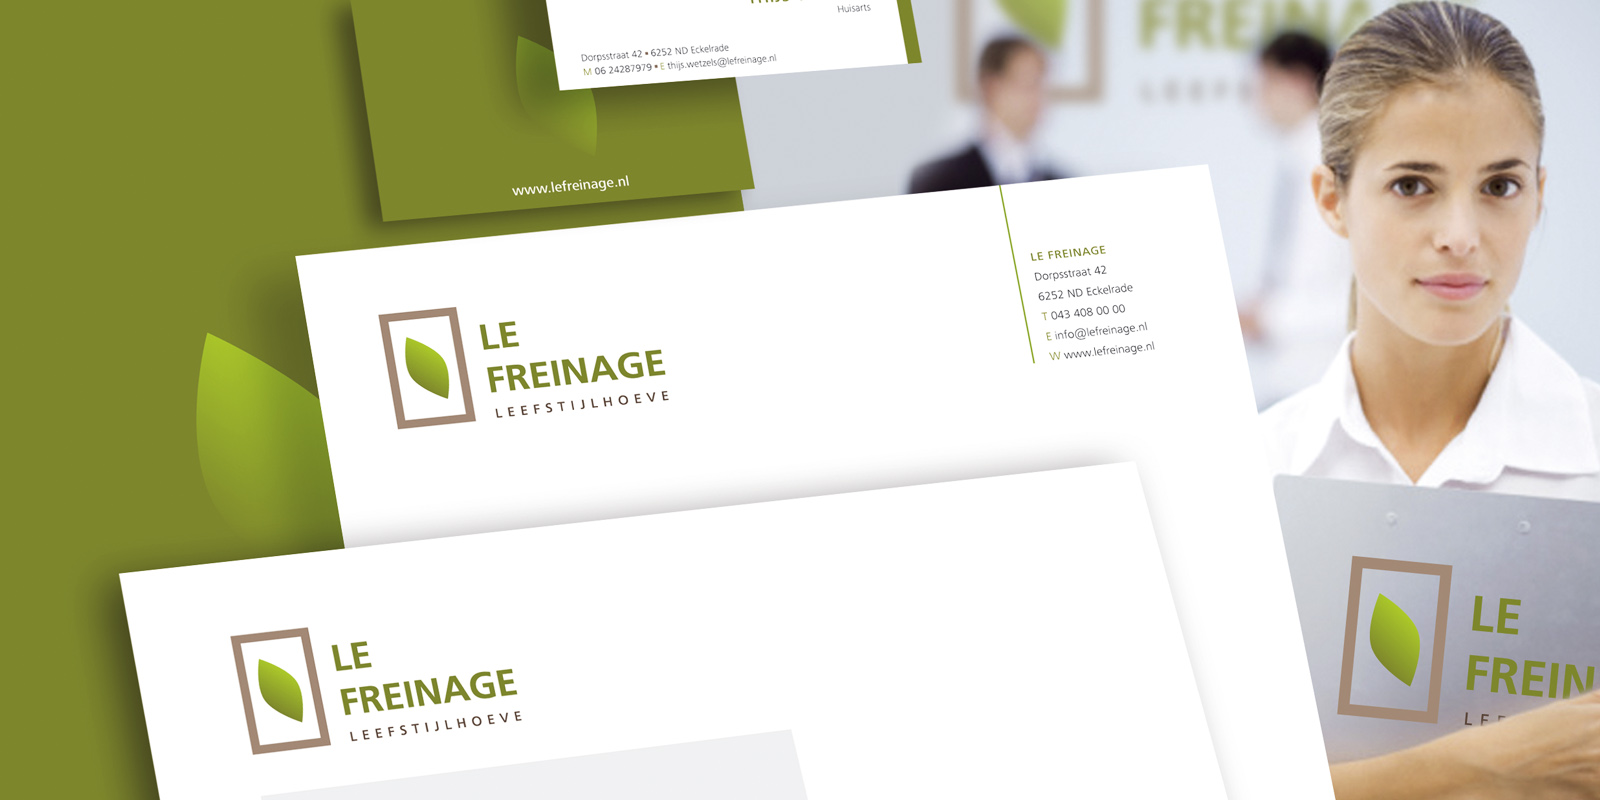   Le Freinage    Center for Lifestyle  